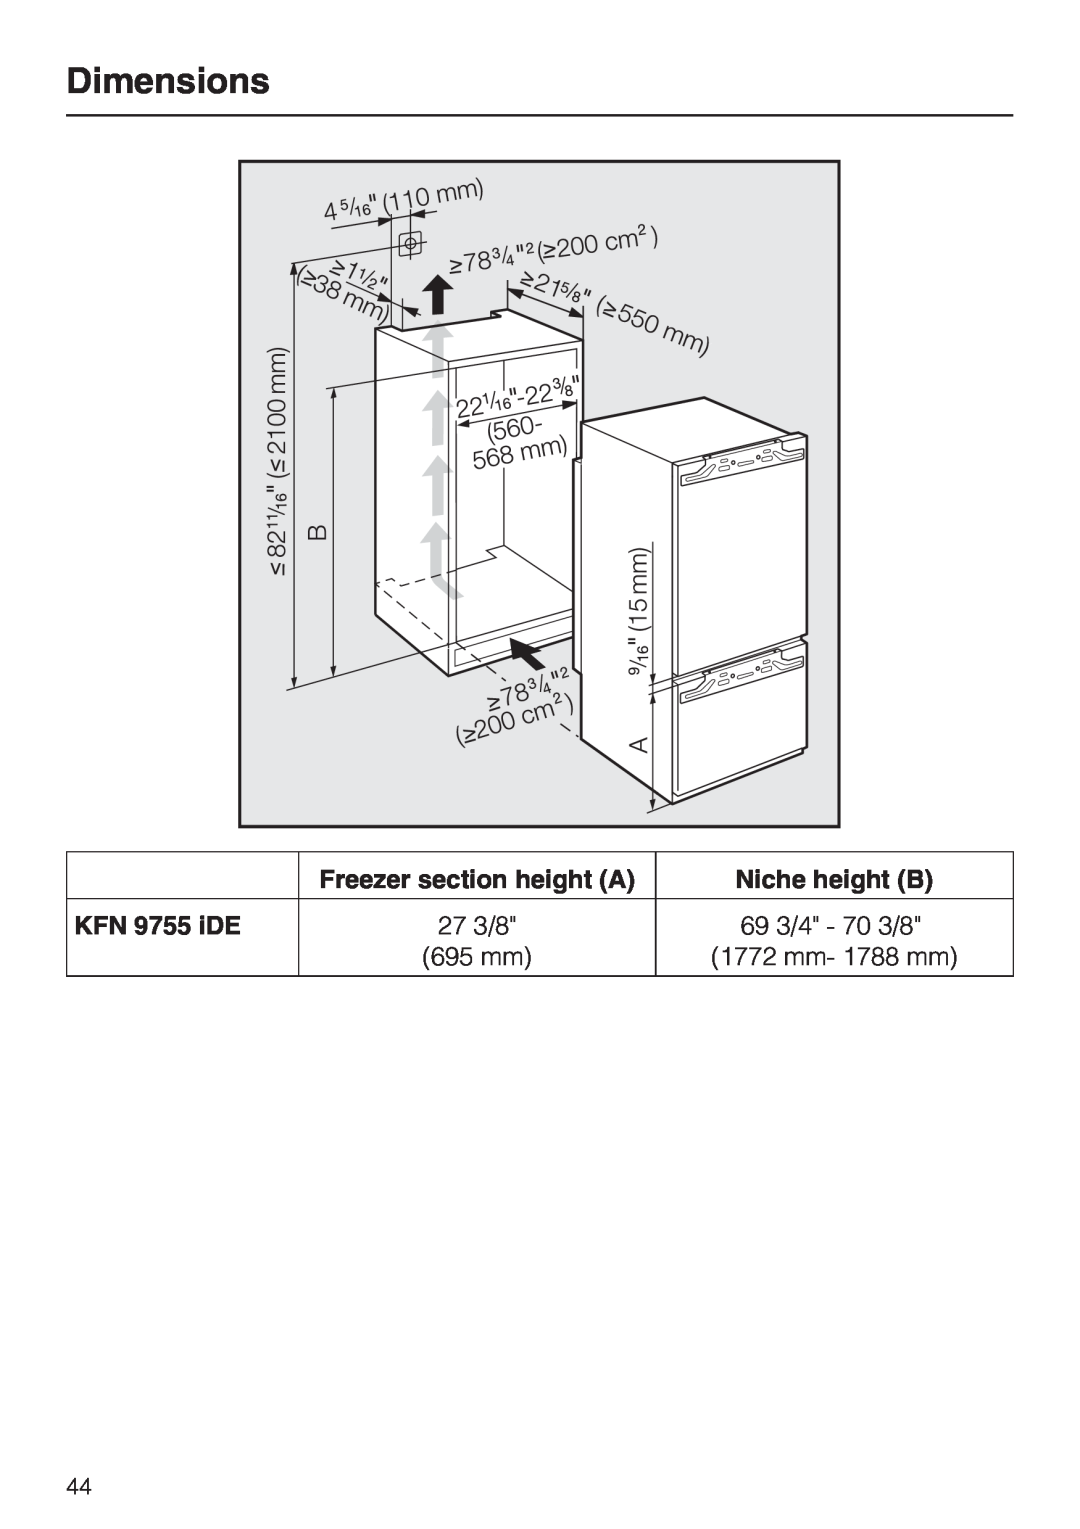 Miele KFN 9755 IDE installation instructions Dimensions, Freezer section height A, Niche height B, KFN 9755 iDE 